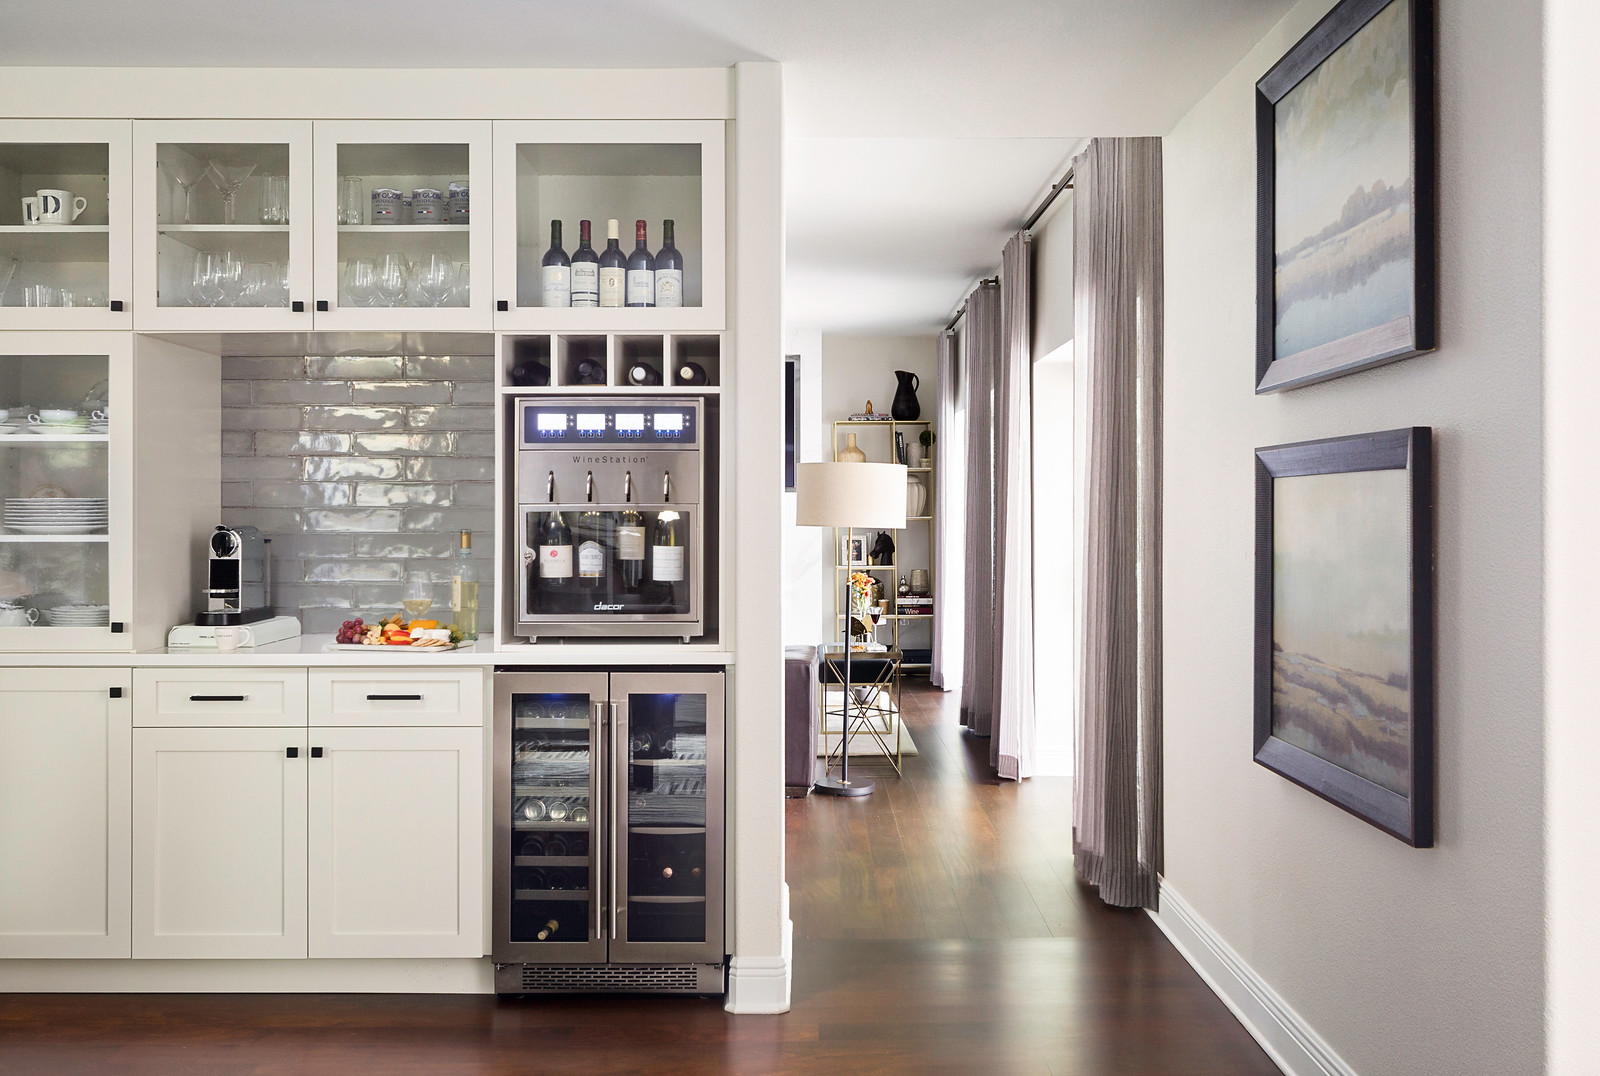 An image showing a modern wine bar with new subway tiles featured on the kitchen wall